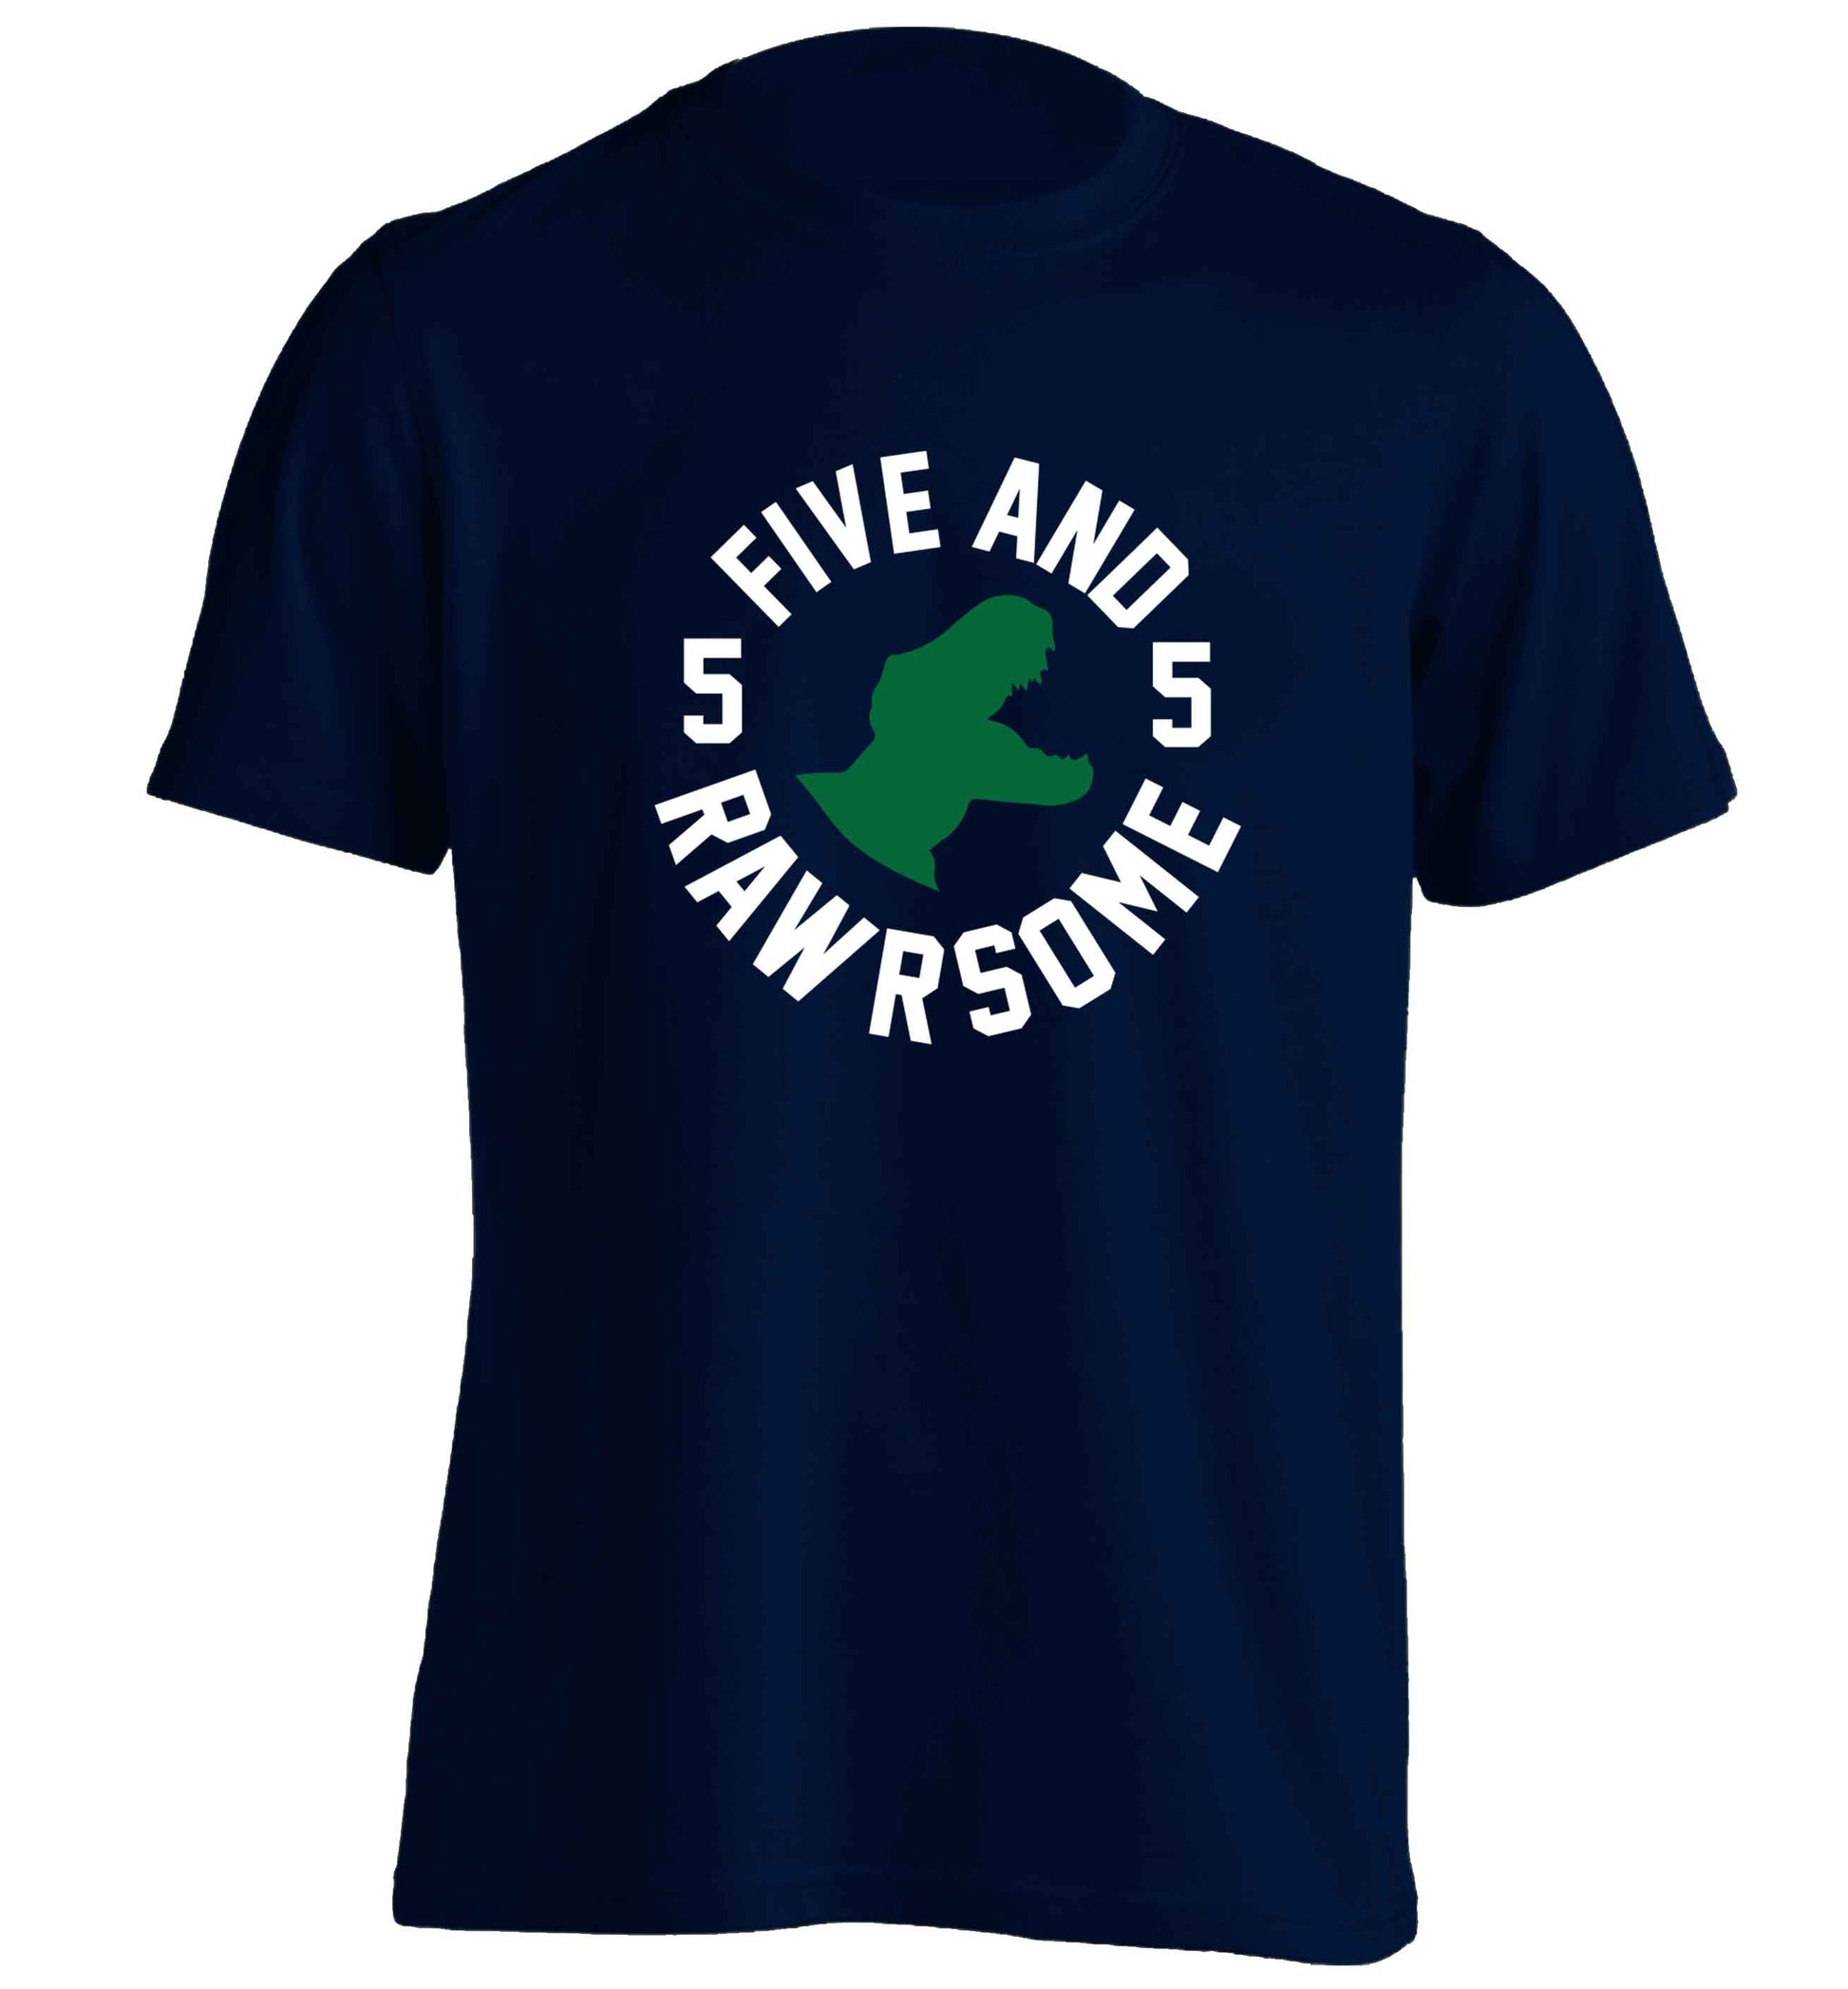 Five and rawrsome adults unisex navy Tshirt 2XL